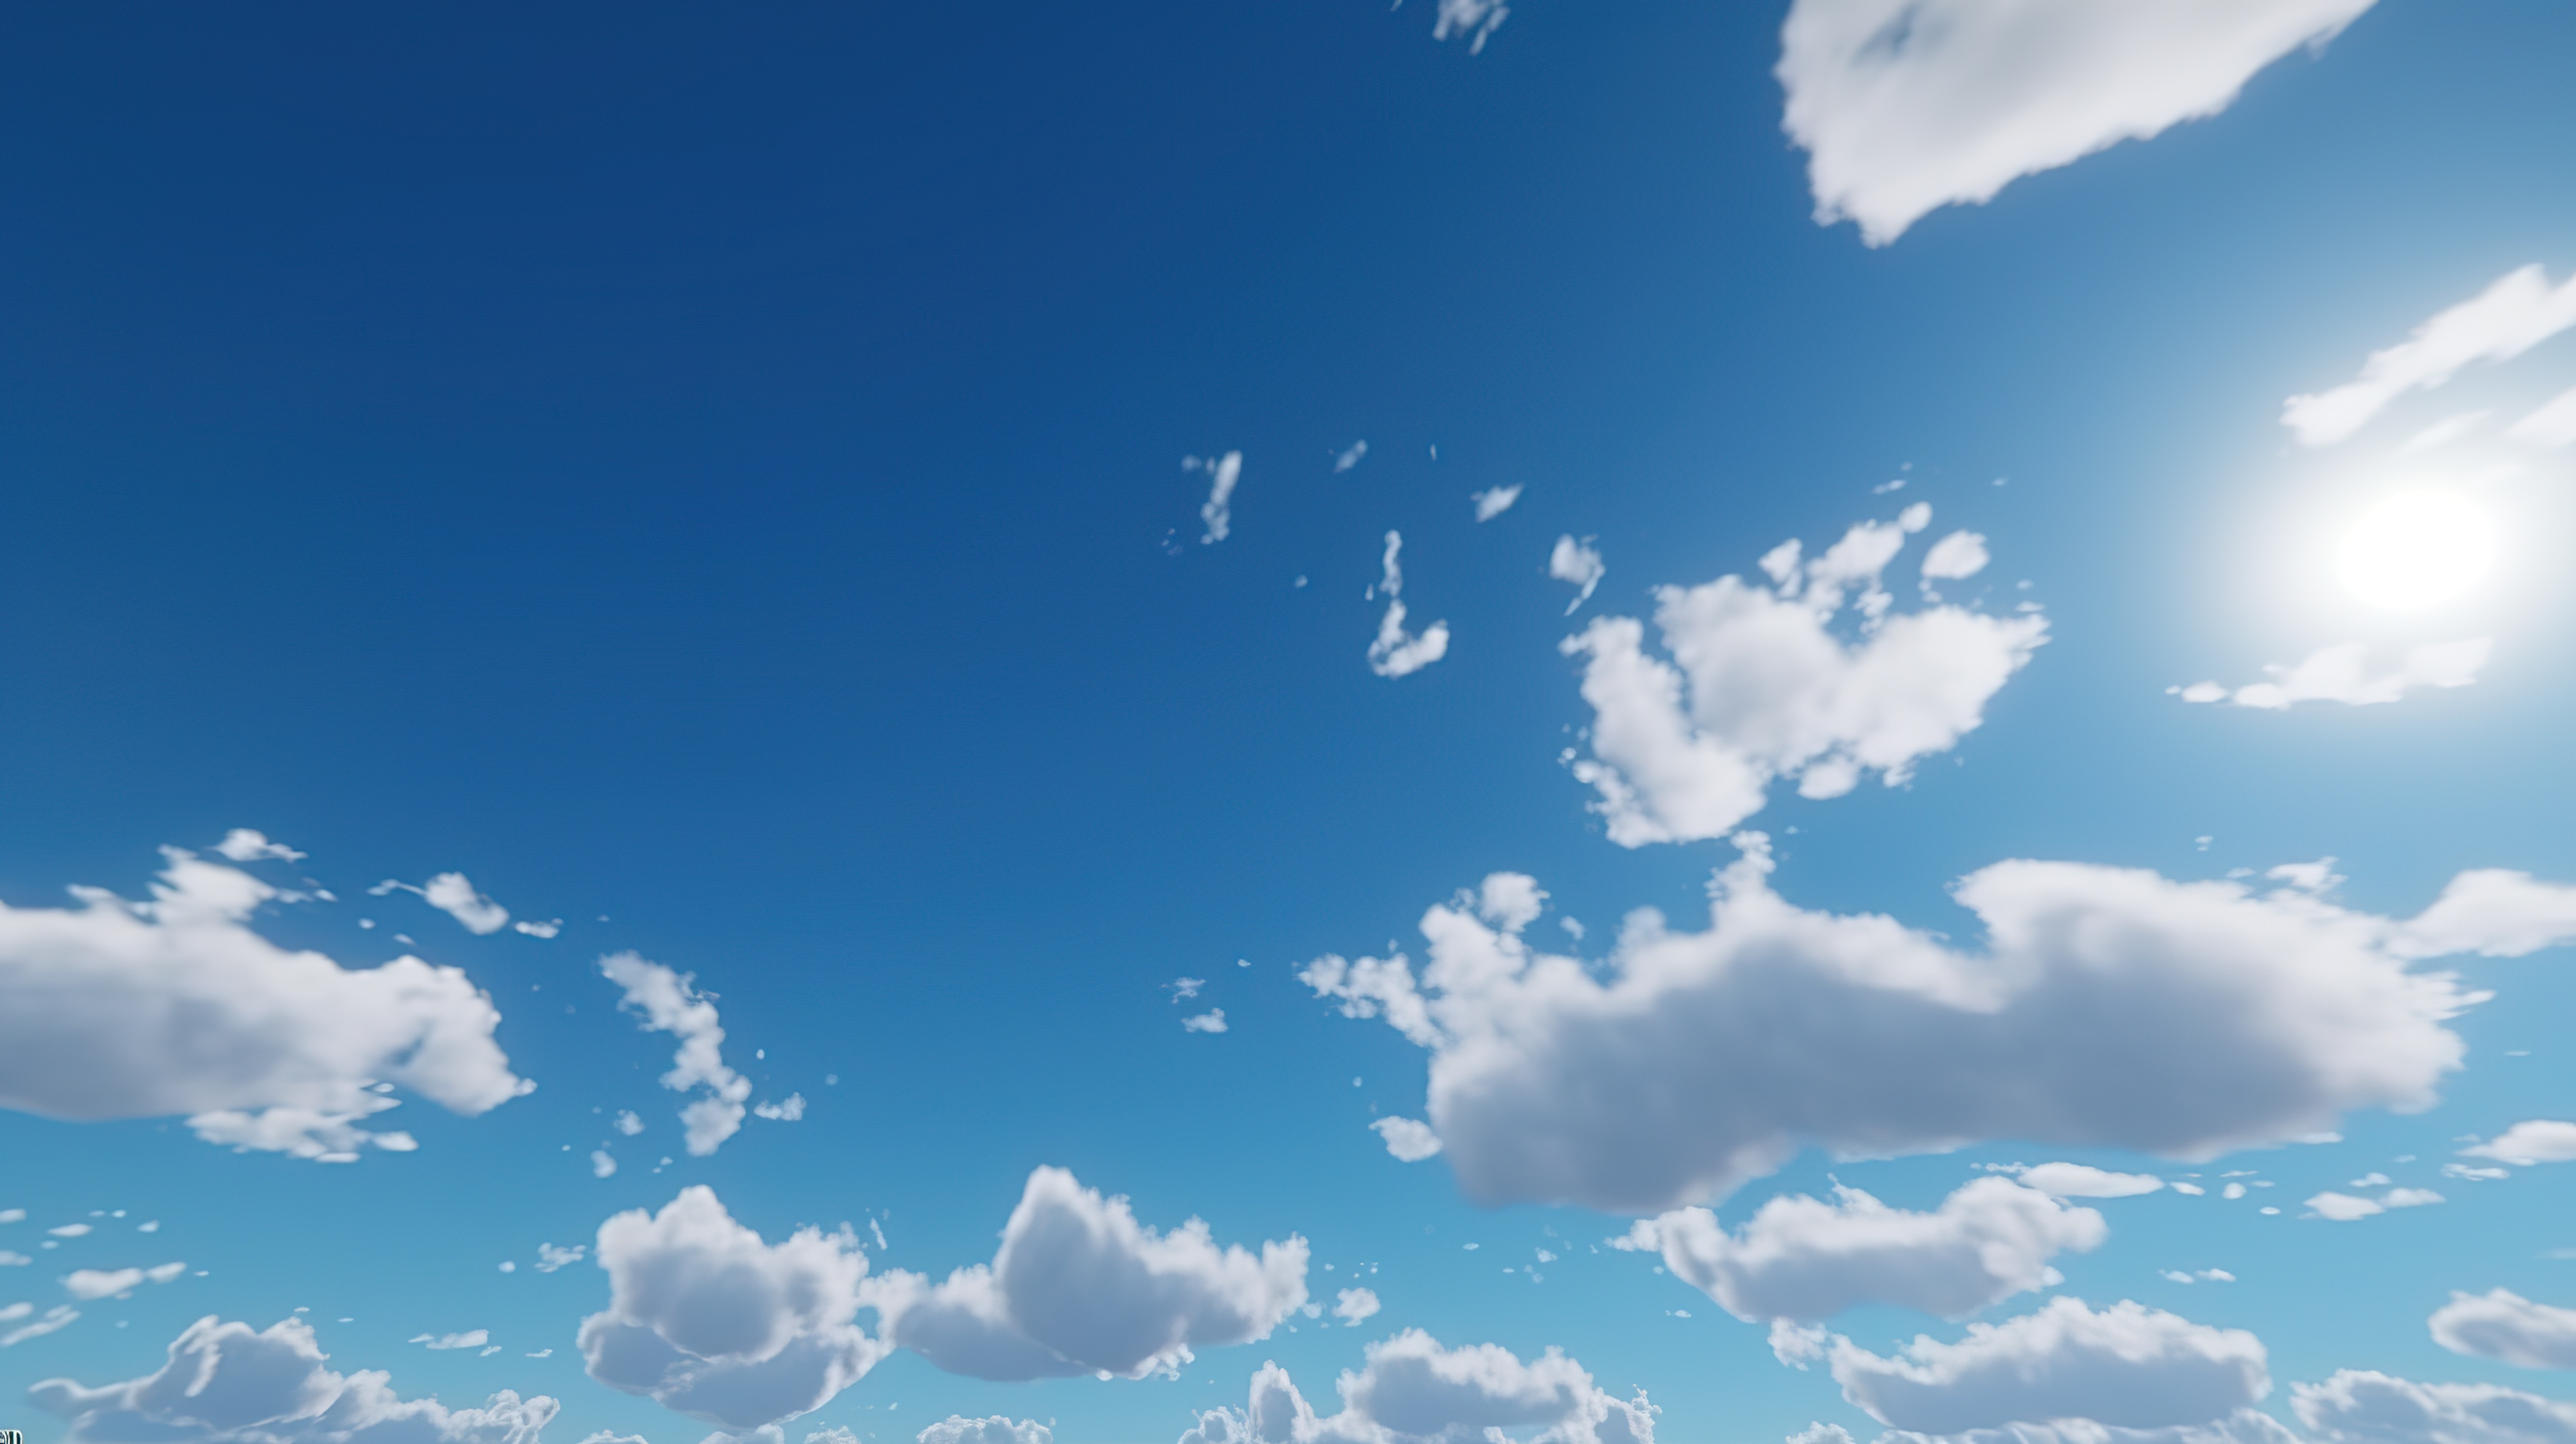 A clear blue sky with fluffy white clouds scattered throughout